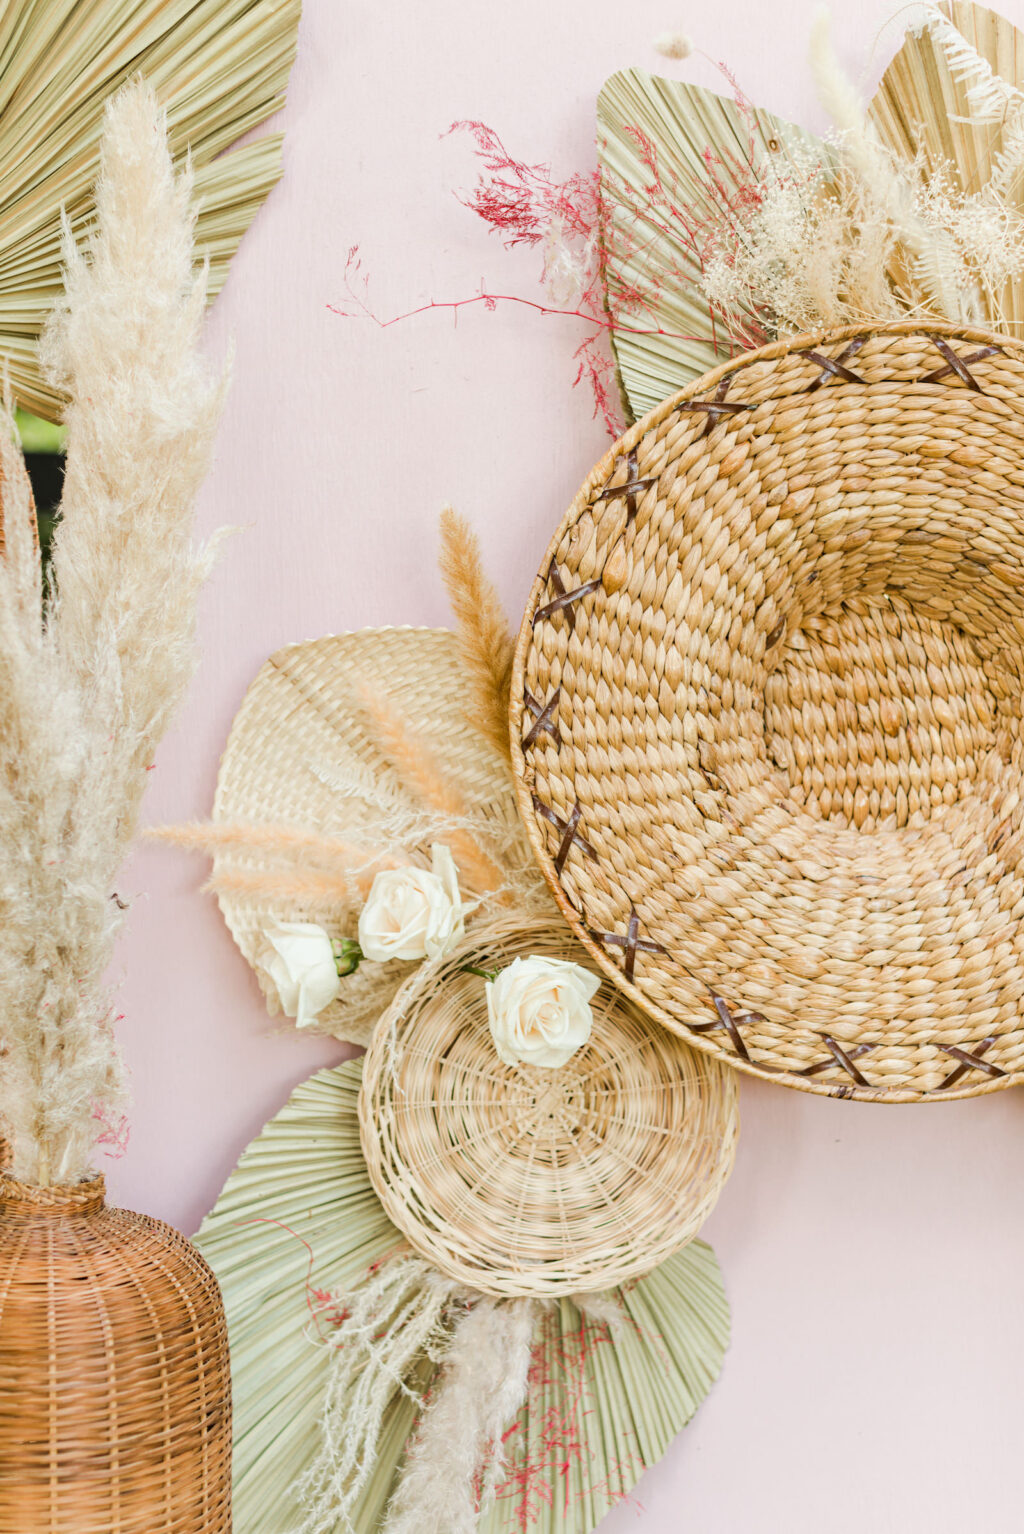 Boho Mid-Century Modern Wedding Ceremony Decor, Pink Wooden Round Arch with Sage Green Dried Leaves, Handwoven Baskets, Pampas Grass in Tall Rattan Vase | Tampa Wedding Ceremony Backdrop Designer Taylored Affairs | Big Fake Wedding